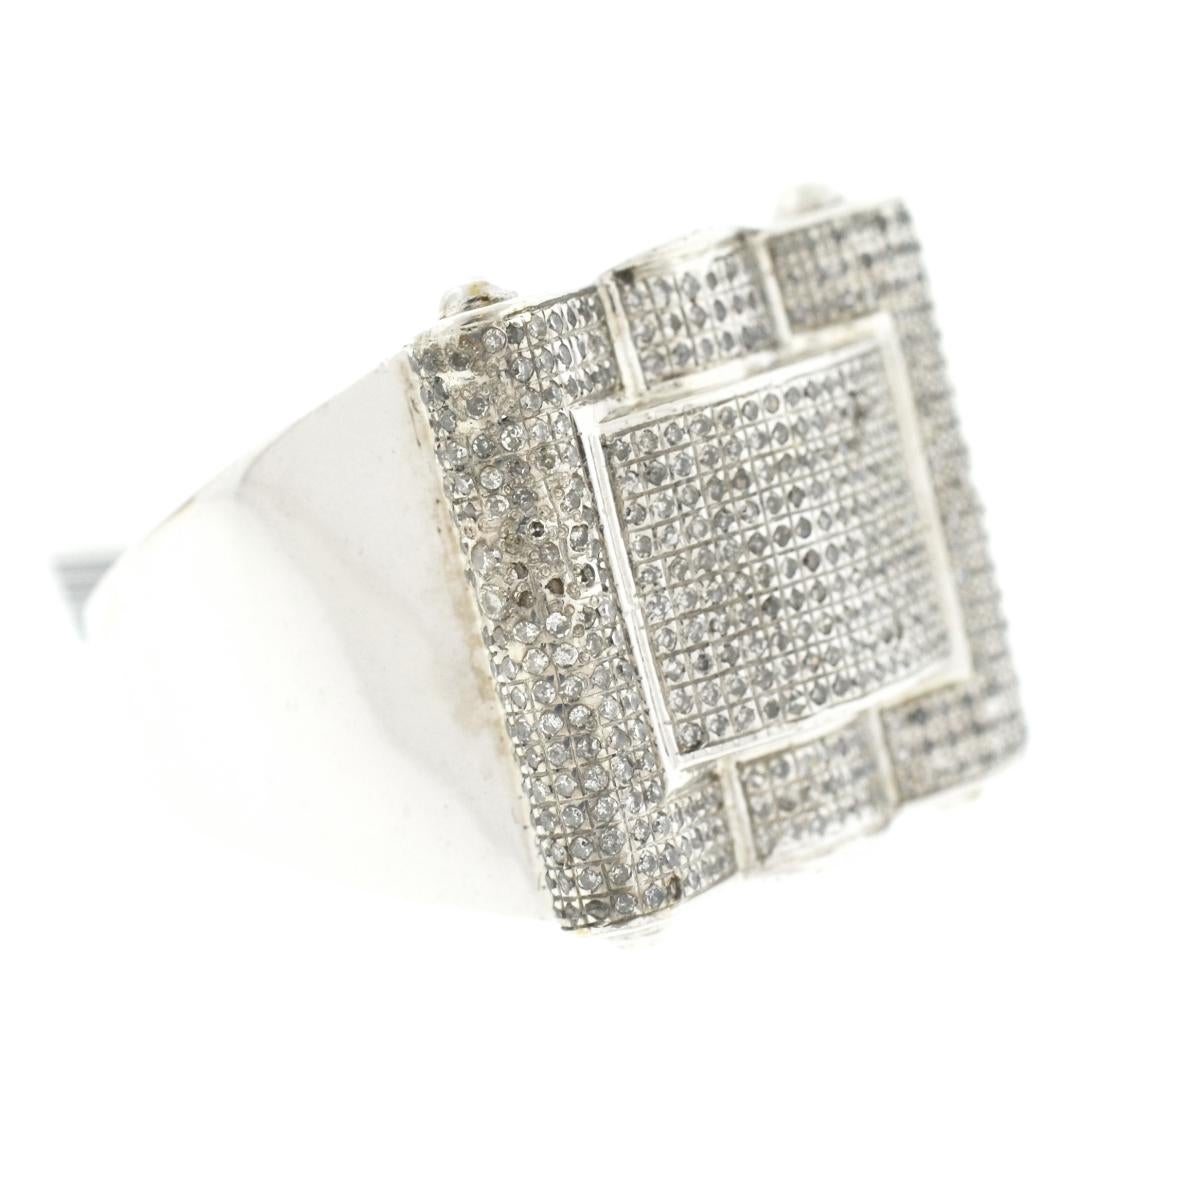 Style - Square Pave Diamond Mens Ring
Size - 10
Metal - 10k White Gold
Weight - 9.5 Grams
Stones - Pave Diamonds
i-1532oee